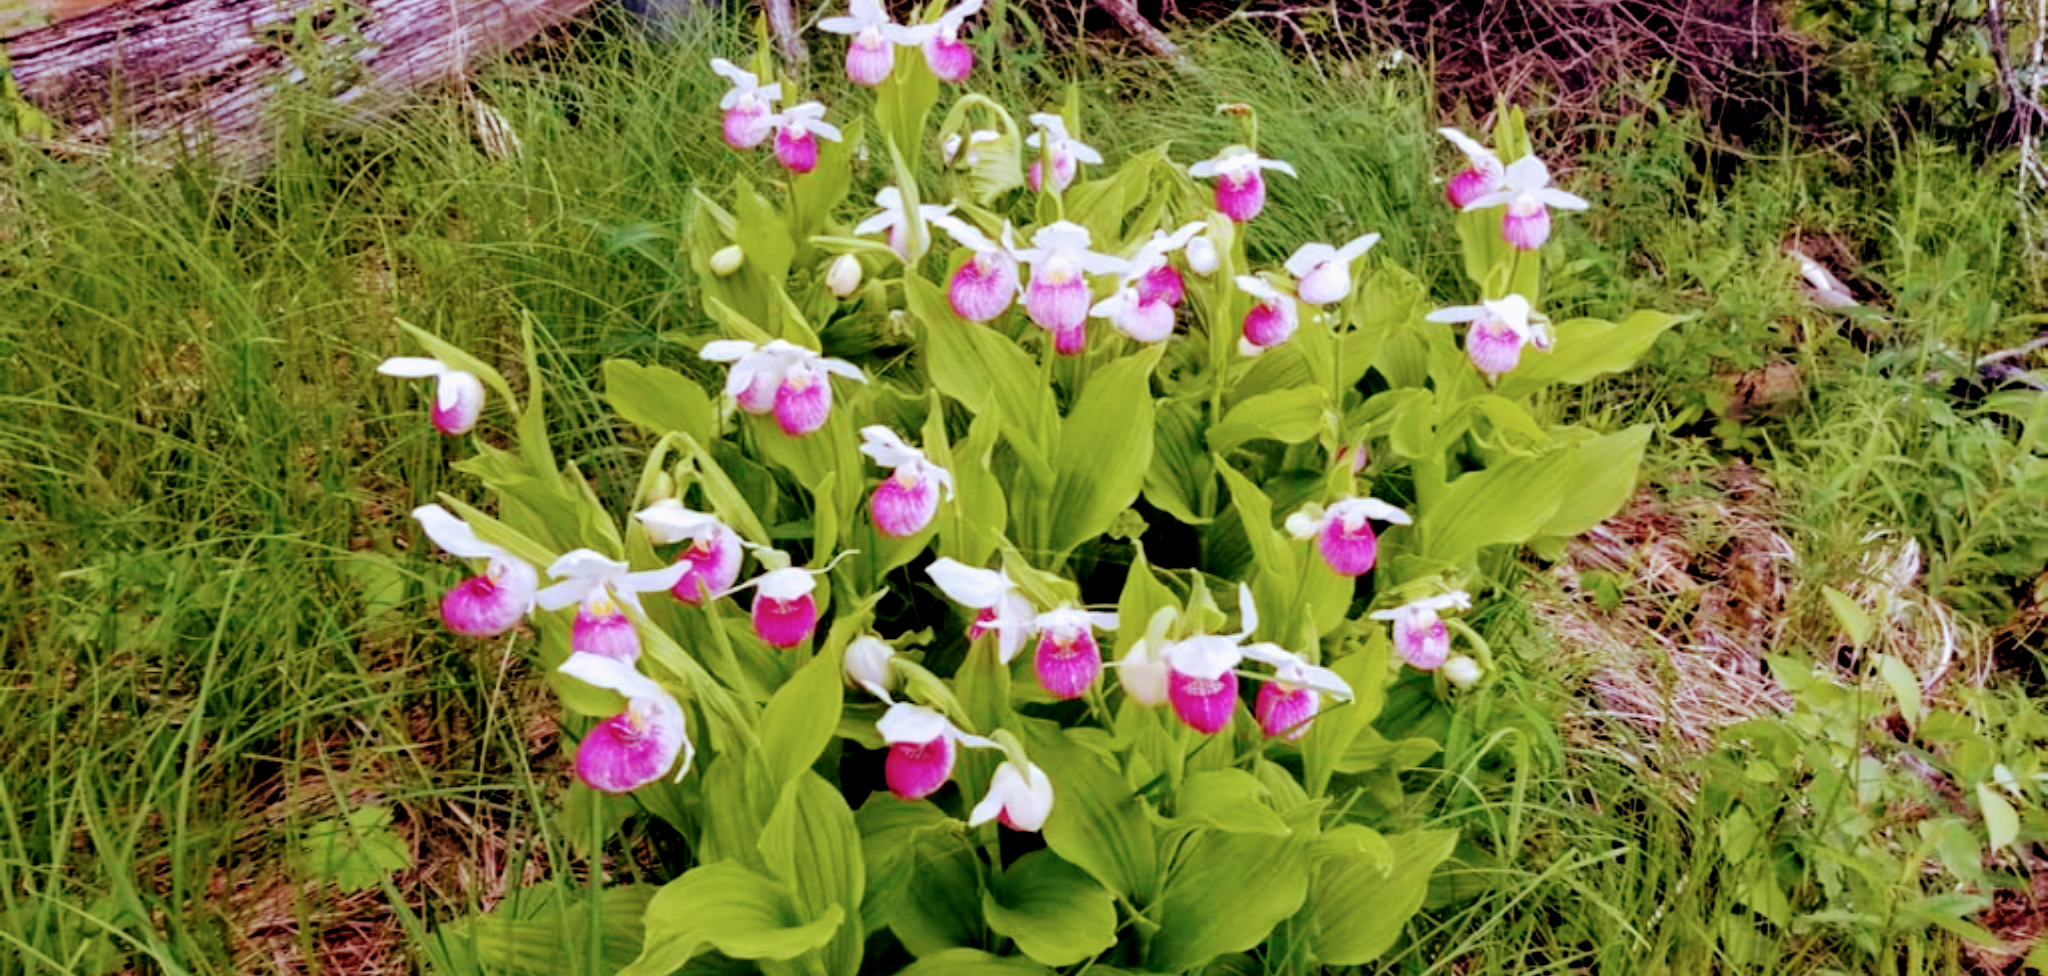 pink lady slippers